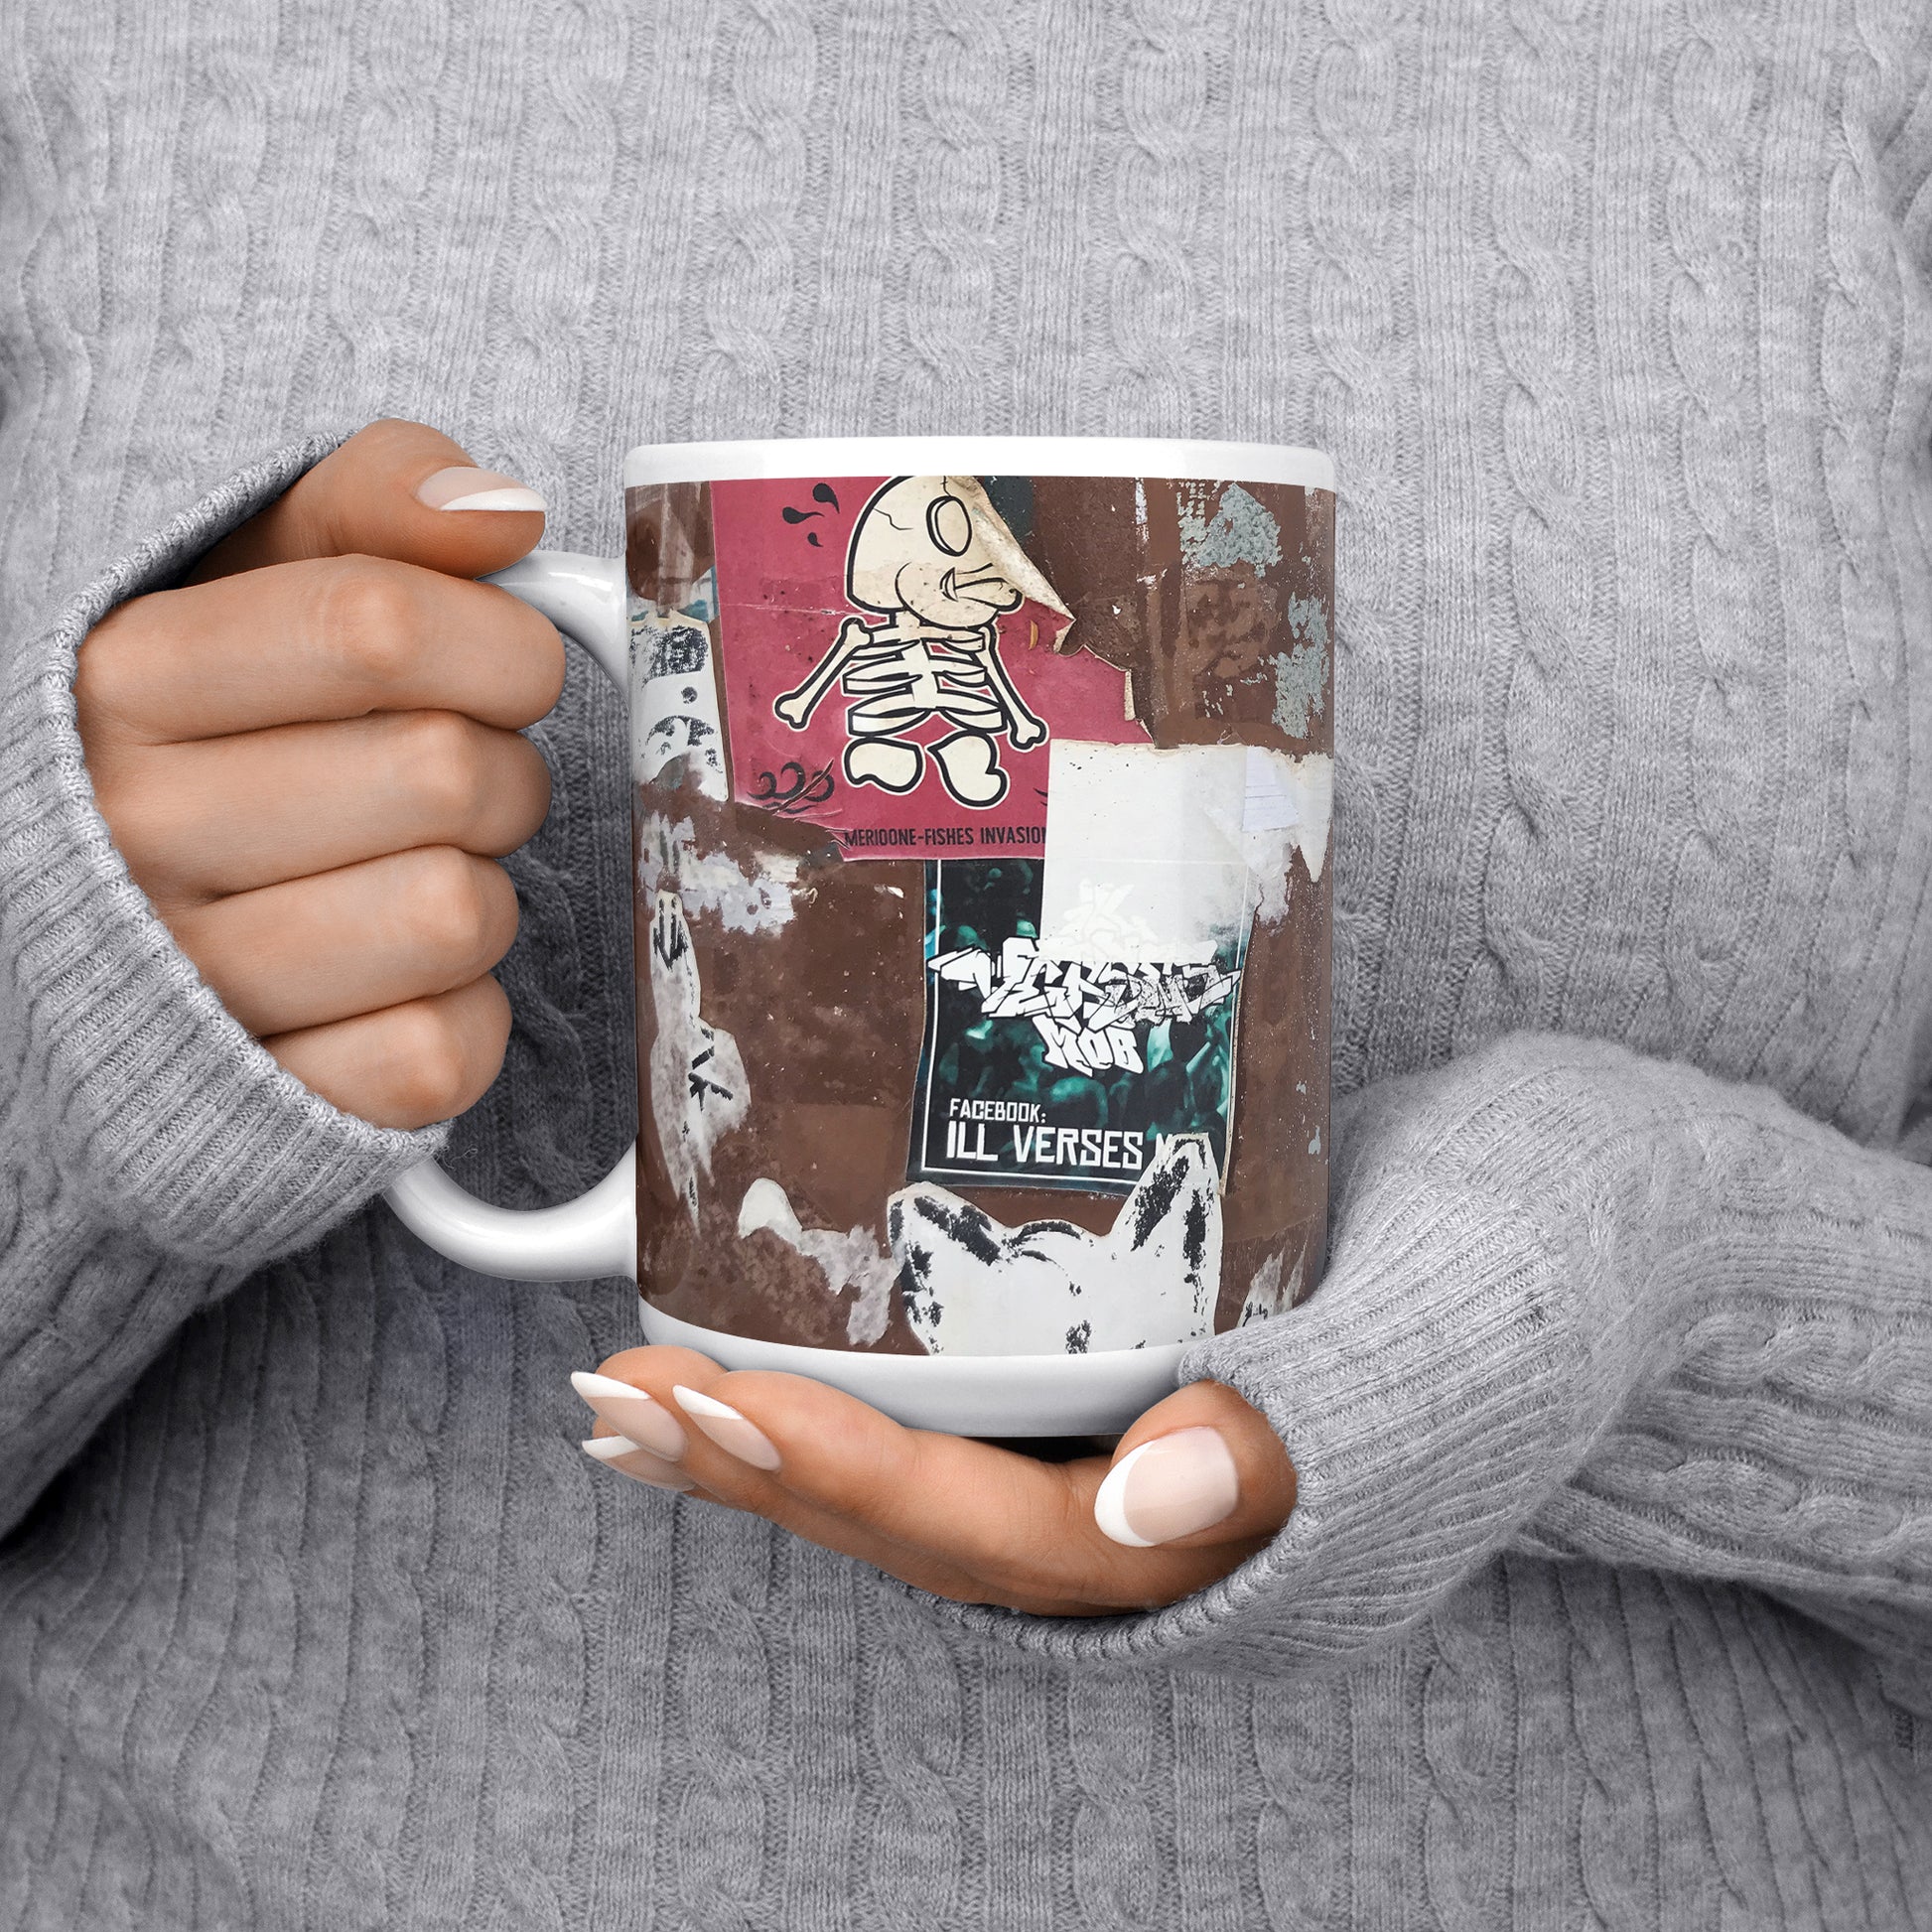 Be inspired by our Urban Art Coffee Mug – Merioone Fishes from Lagos. The mug has a capacity of 15 oz and the handle on the left side. The design of the mug captures the essence of the street and gives the mug an authentic urban feel, making it resemble a piece of street art itself.